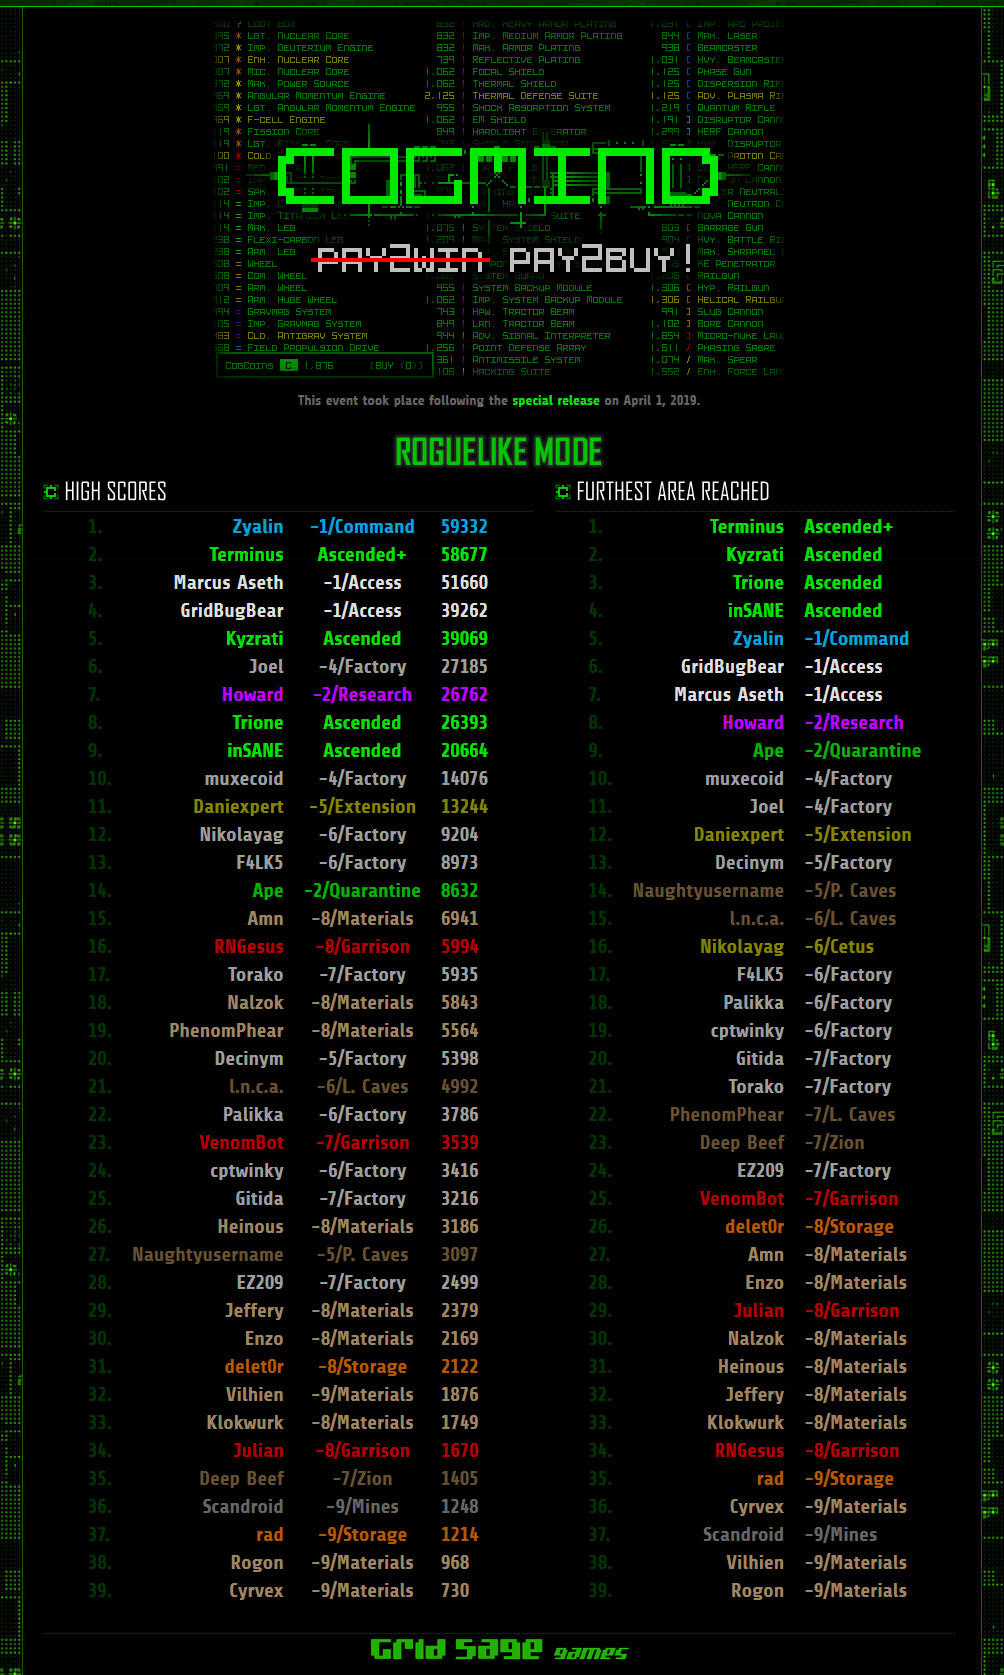 cogmind_pay2buy_leaderboards_190419